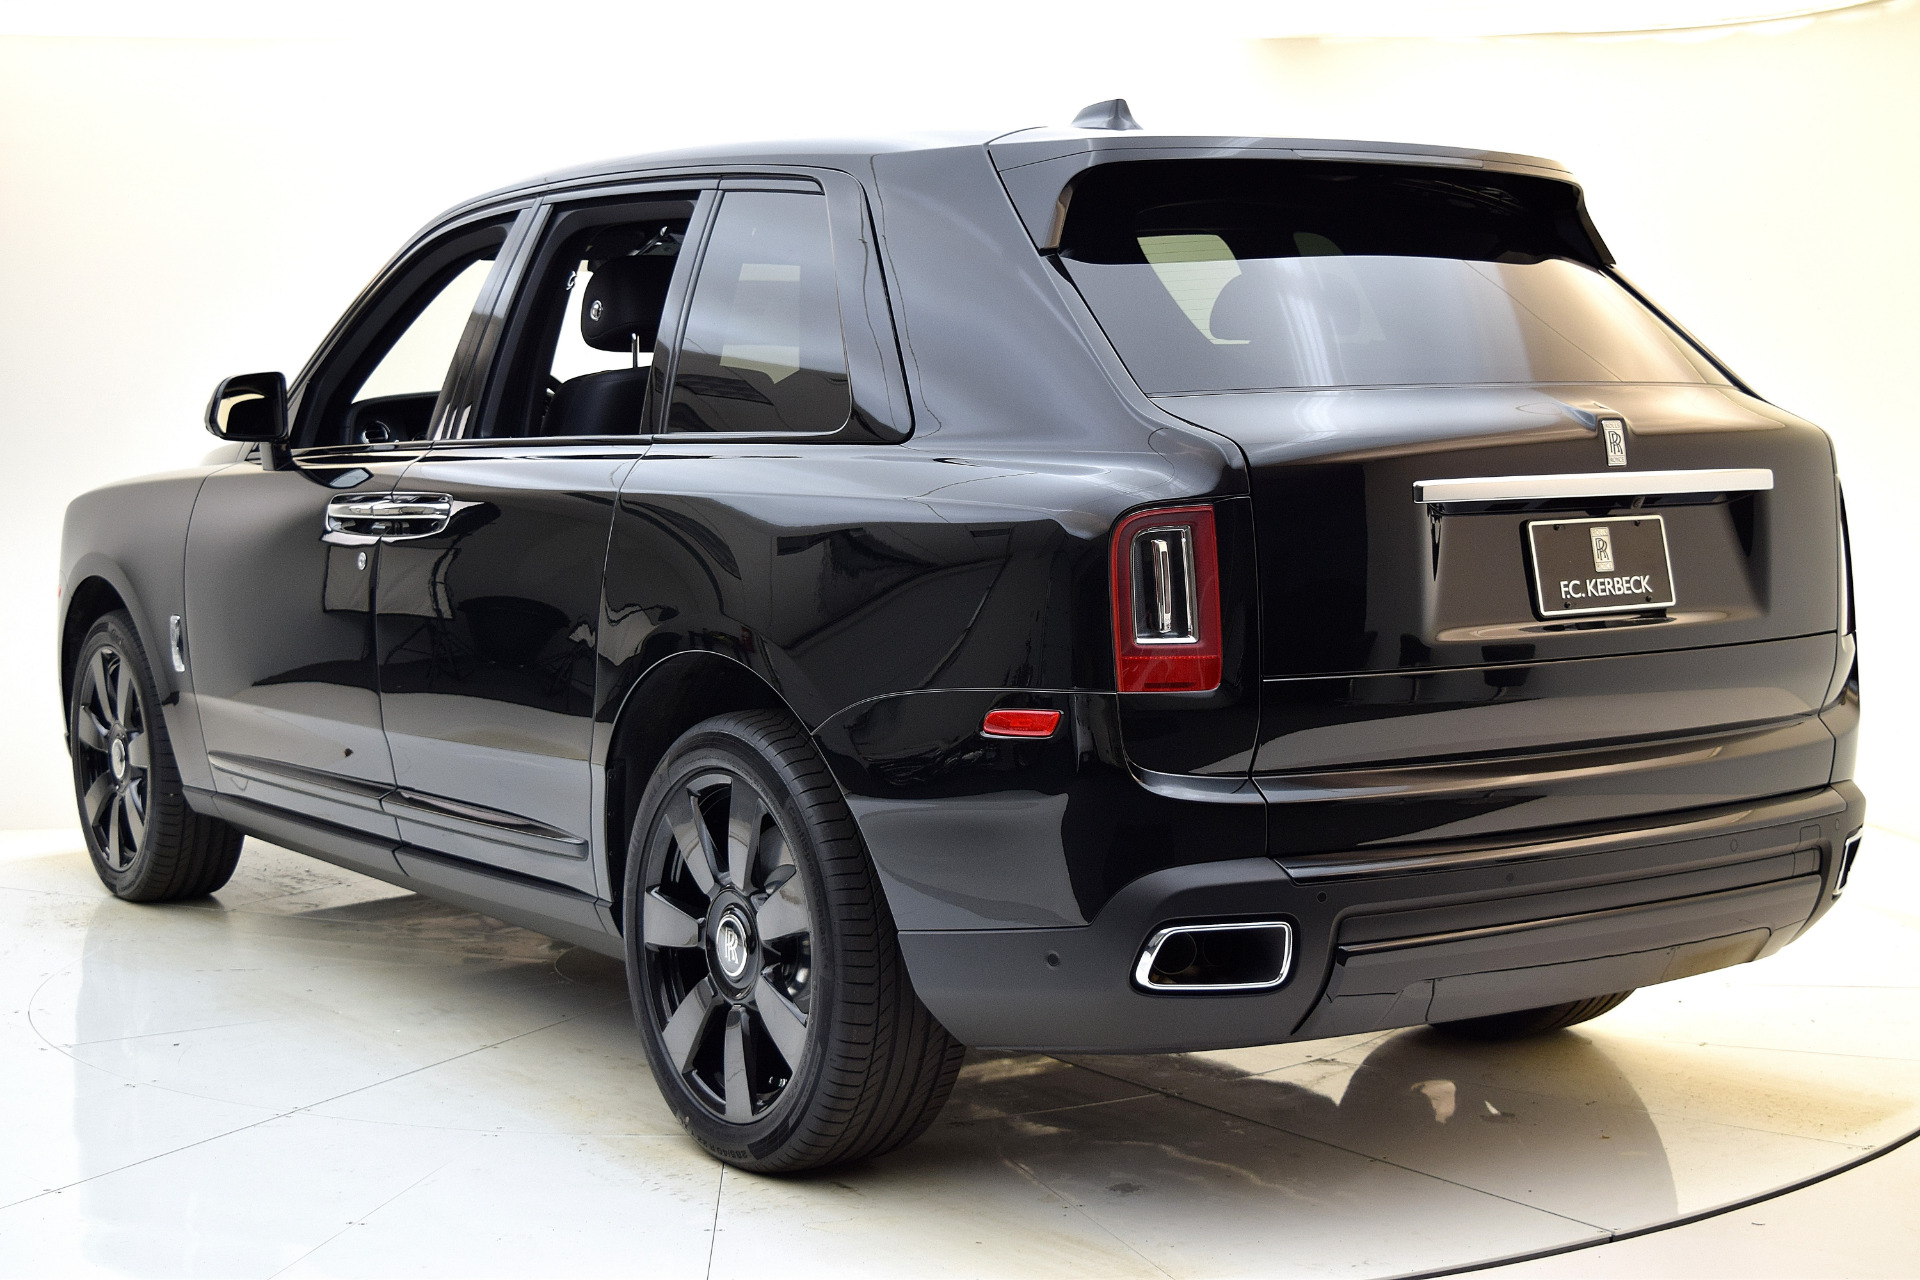 Used 2019 RollsRoyce Cullinan SUV Only 2500 Miles RARE Example REAR Seat  Entertainment For Sale Special Pricing  Chicago Motor Cars Stock 16729